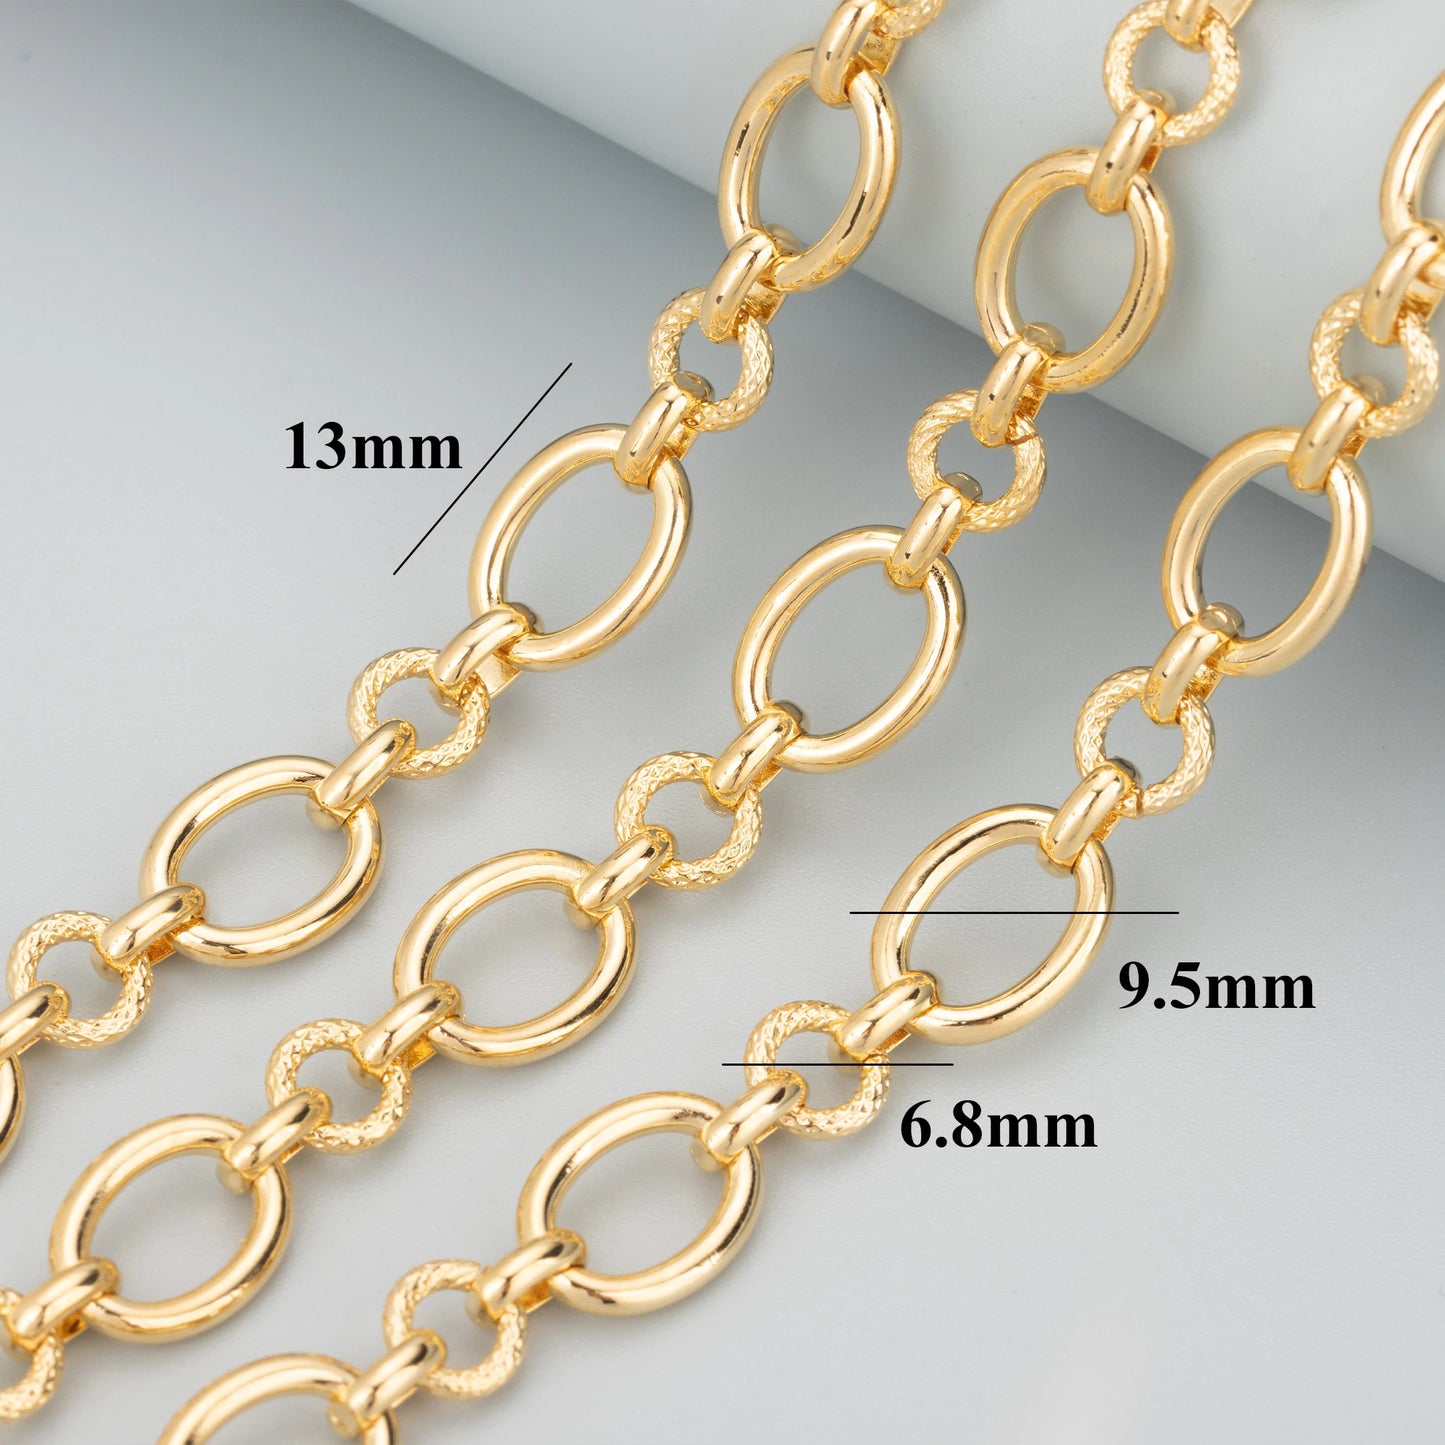 GUFEATHER C169,diy chain,pass REACH,nickel free,18k gold rhodium plated,copper,charm,diy bracelet necklace,jewelry making,1m/lot